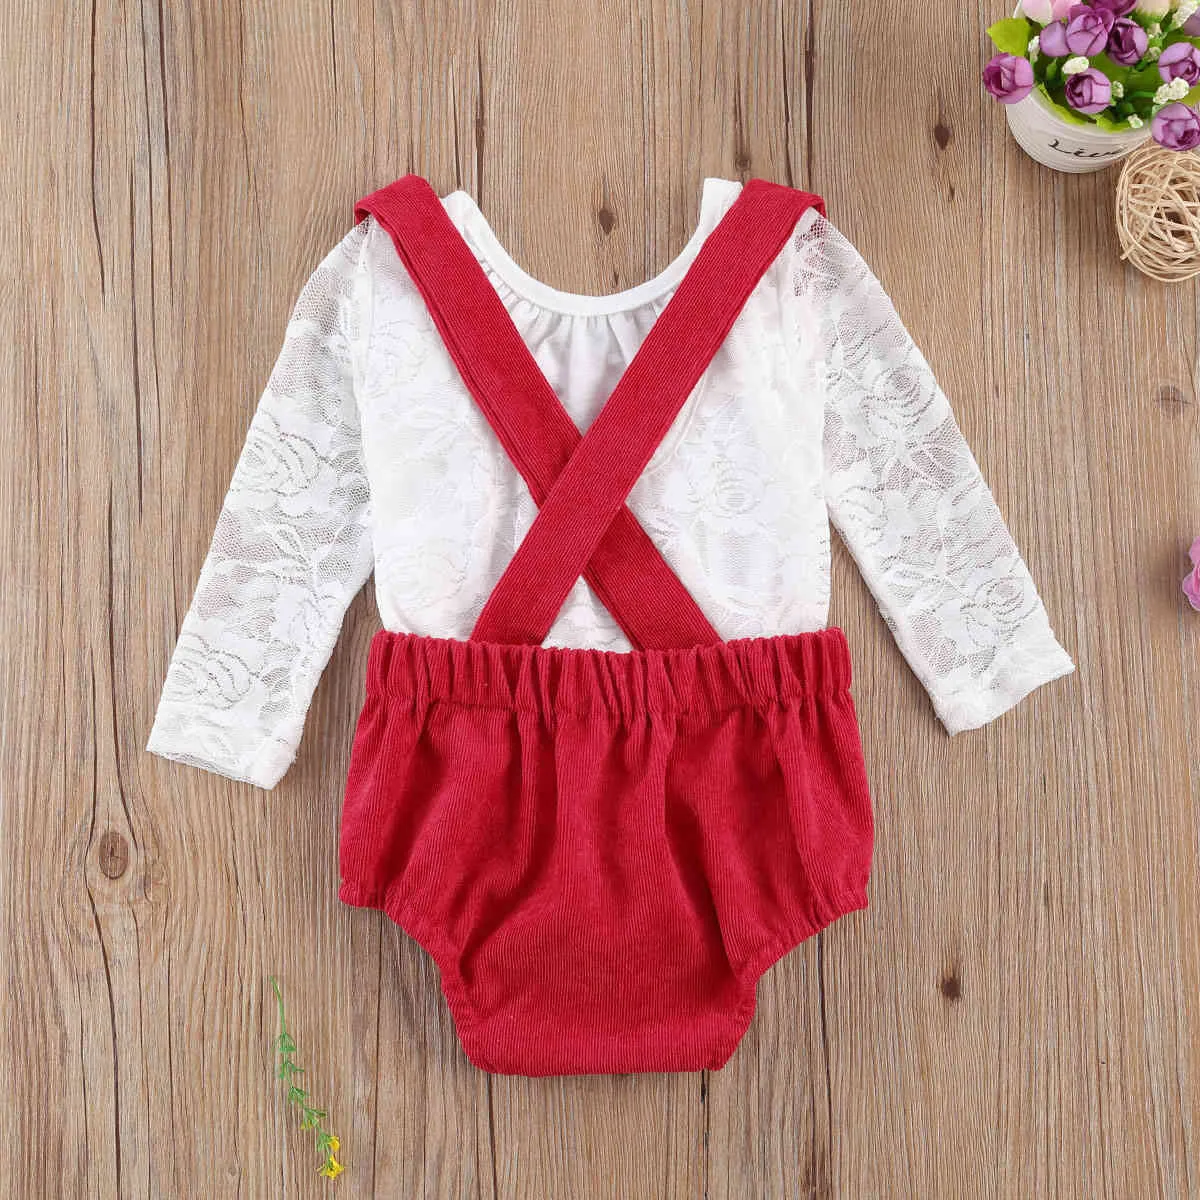 0-18M Christmas Infant born Baby Girl Clothes Set White Lace Romper Red Corduroy Overall Outfits Autumn BABY Clothing 210515